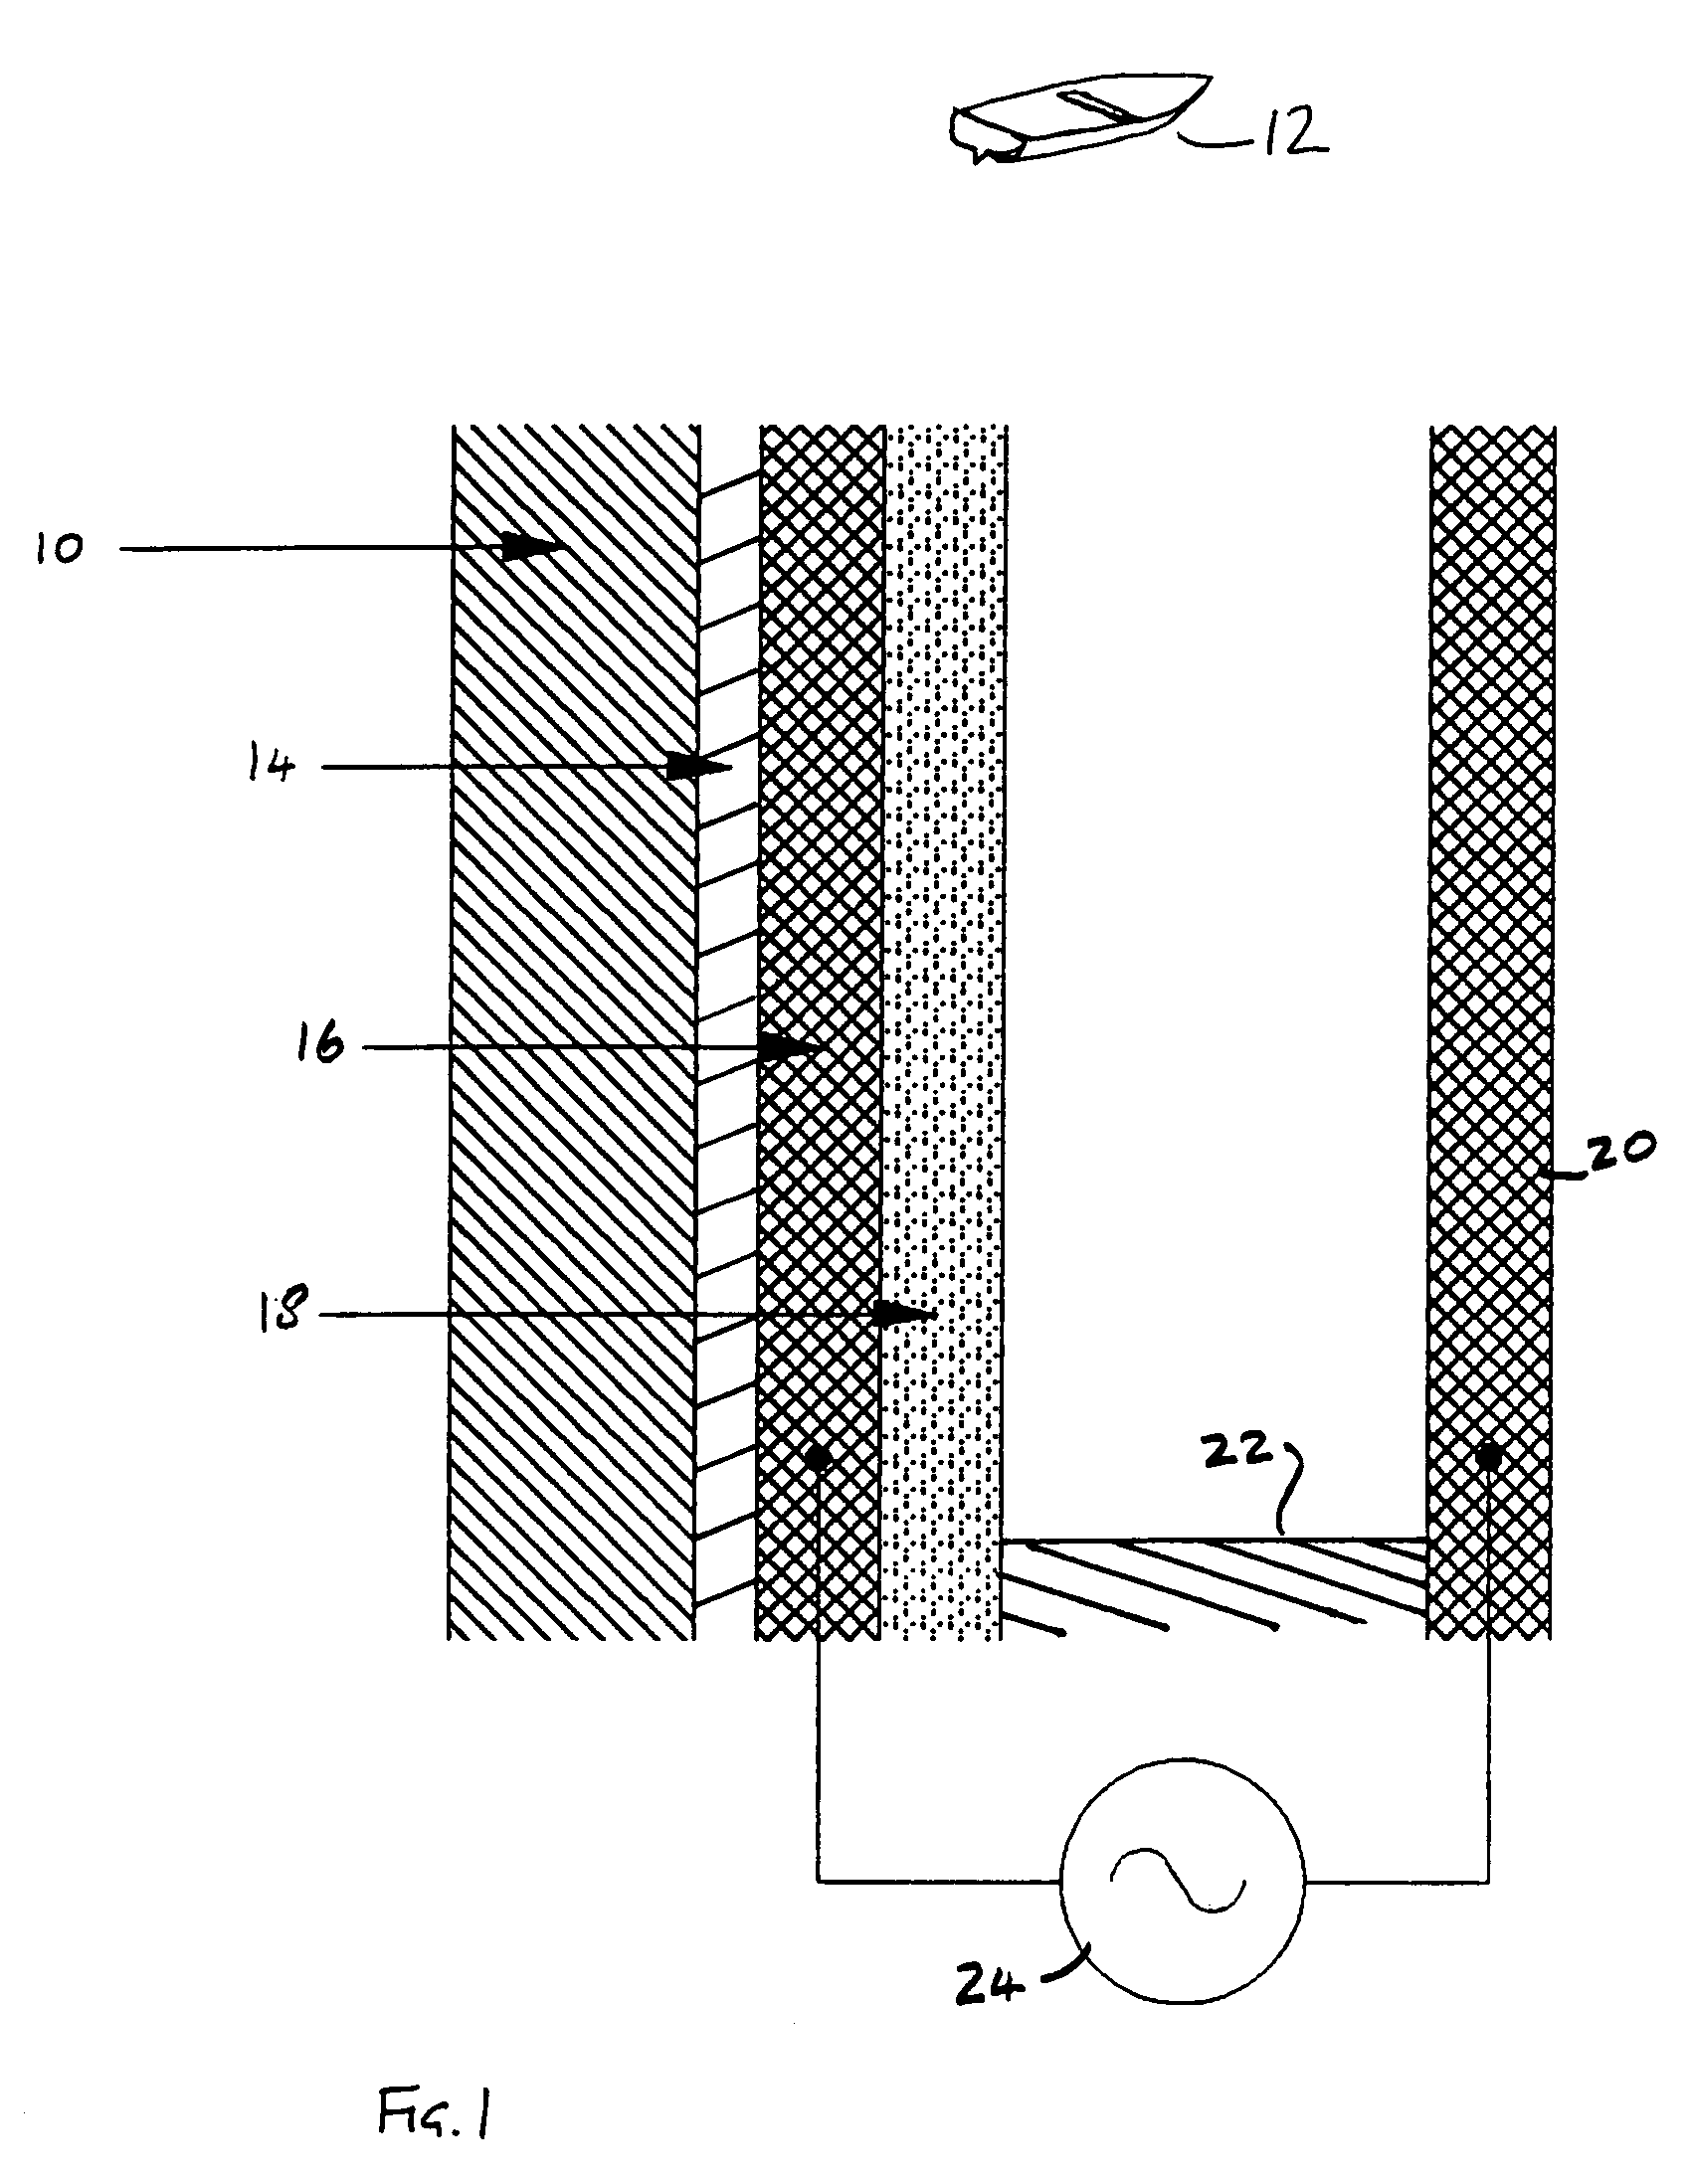 Apparatus for harming or killing fouling flora or fauna and an item carrying the same